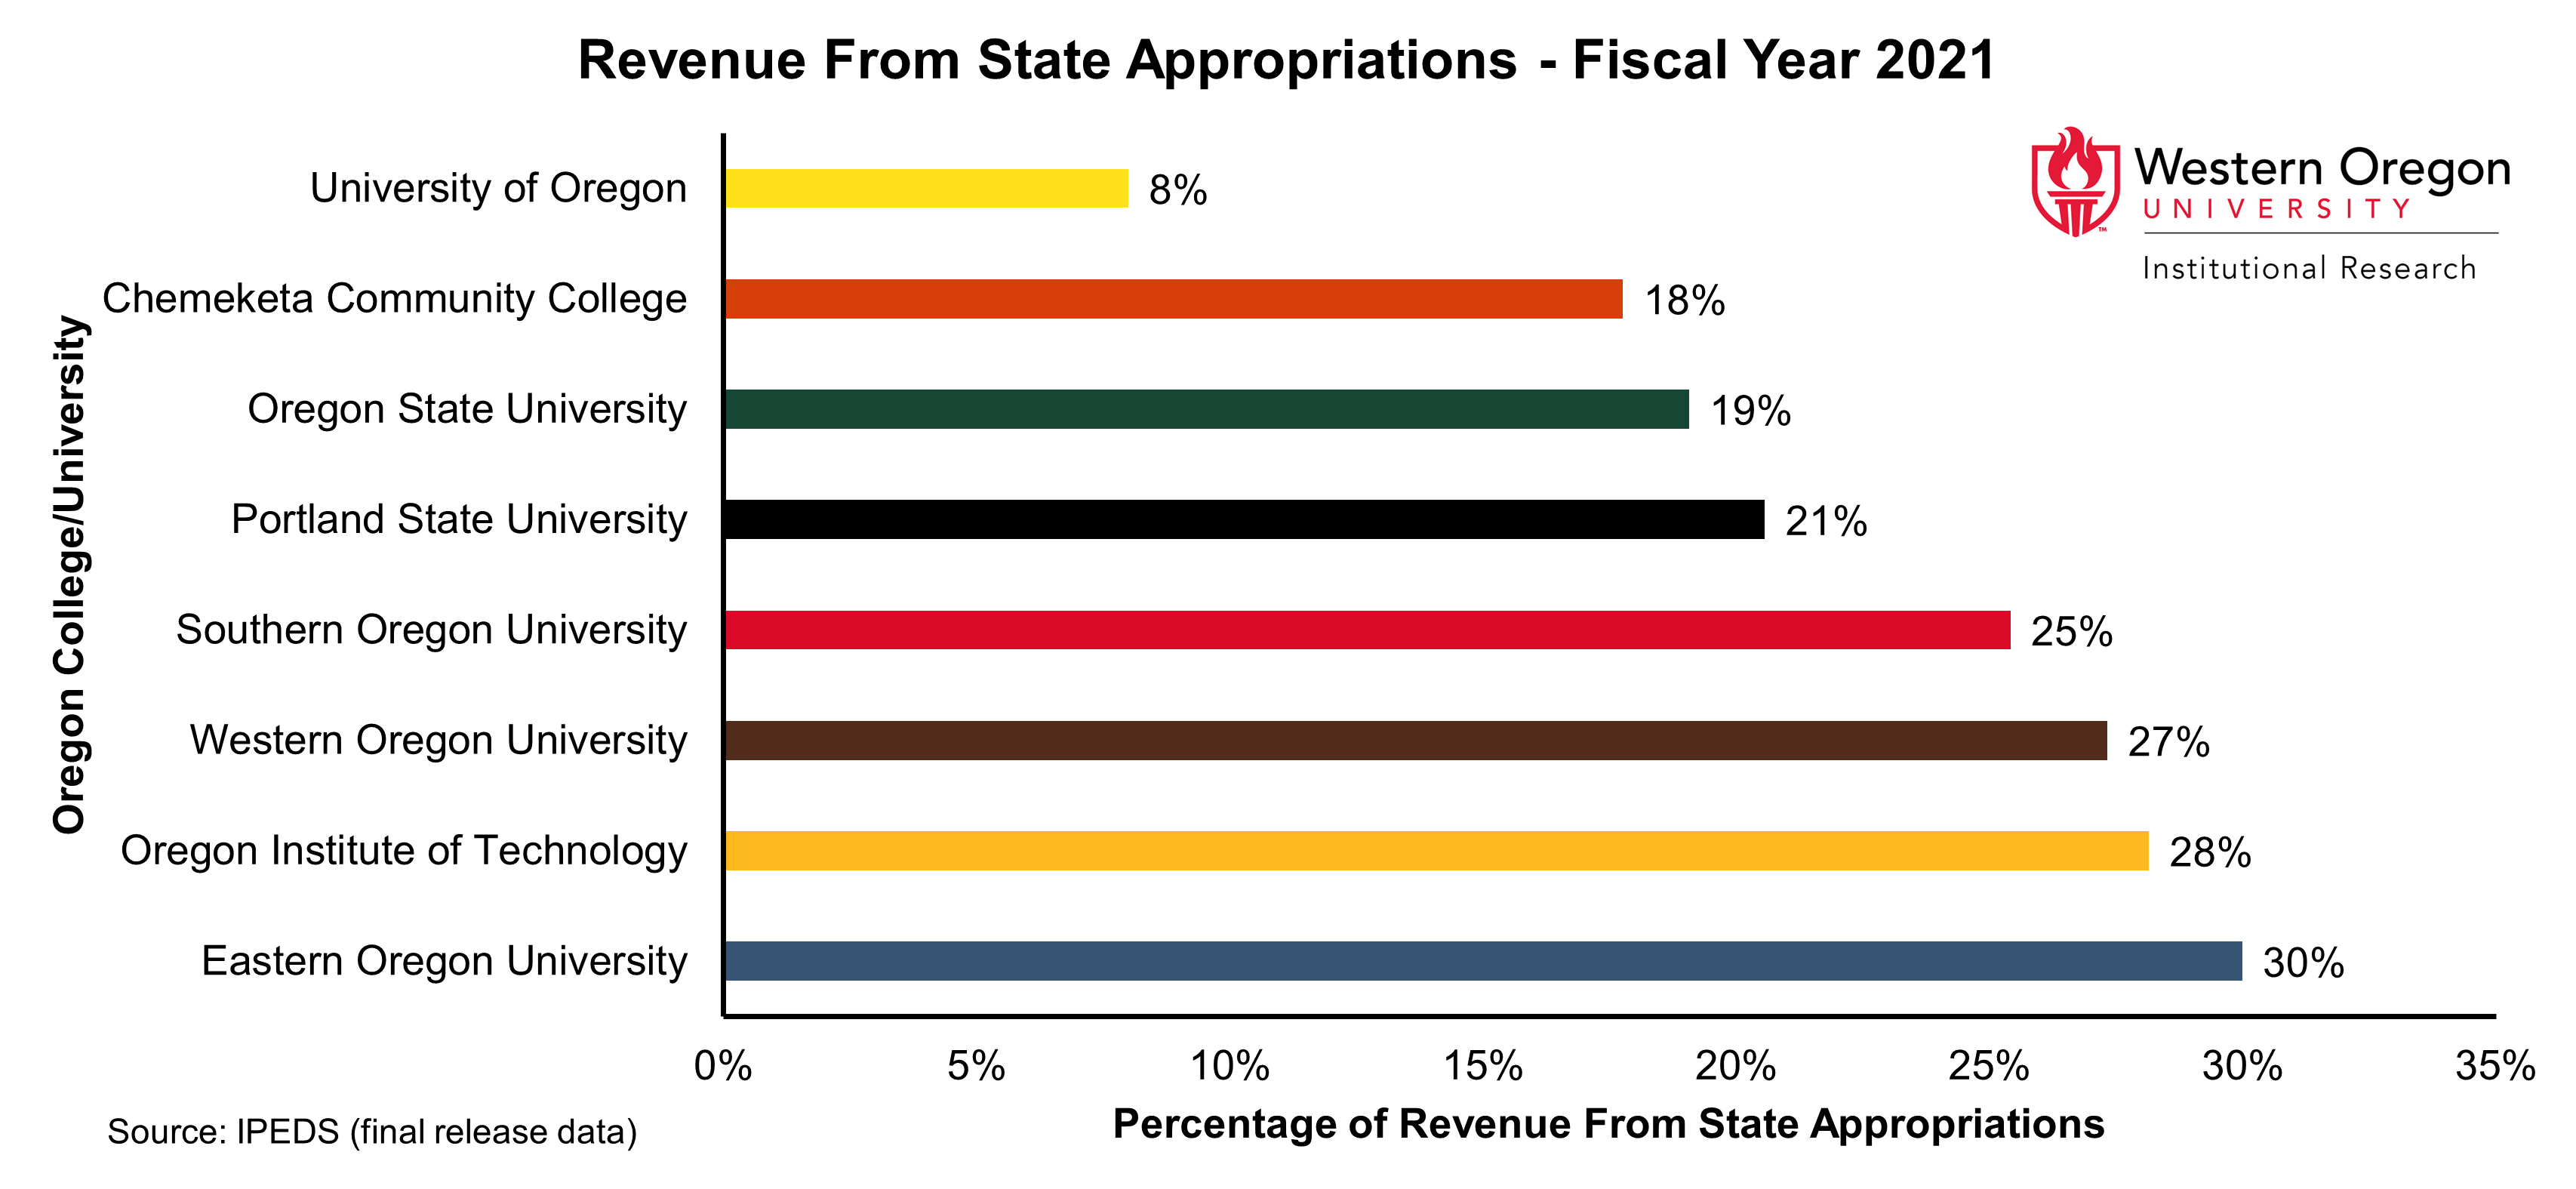 Bar graph of the percentage of revenue from state appropriations for WOU and other Oregon Public Universities in 2021, showing percentages that range from 8% to 30% with WOU's percentage falling in the top half of the distribution